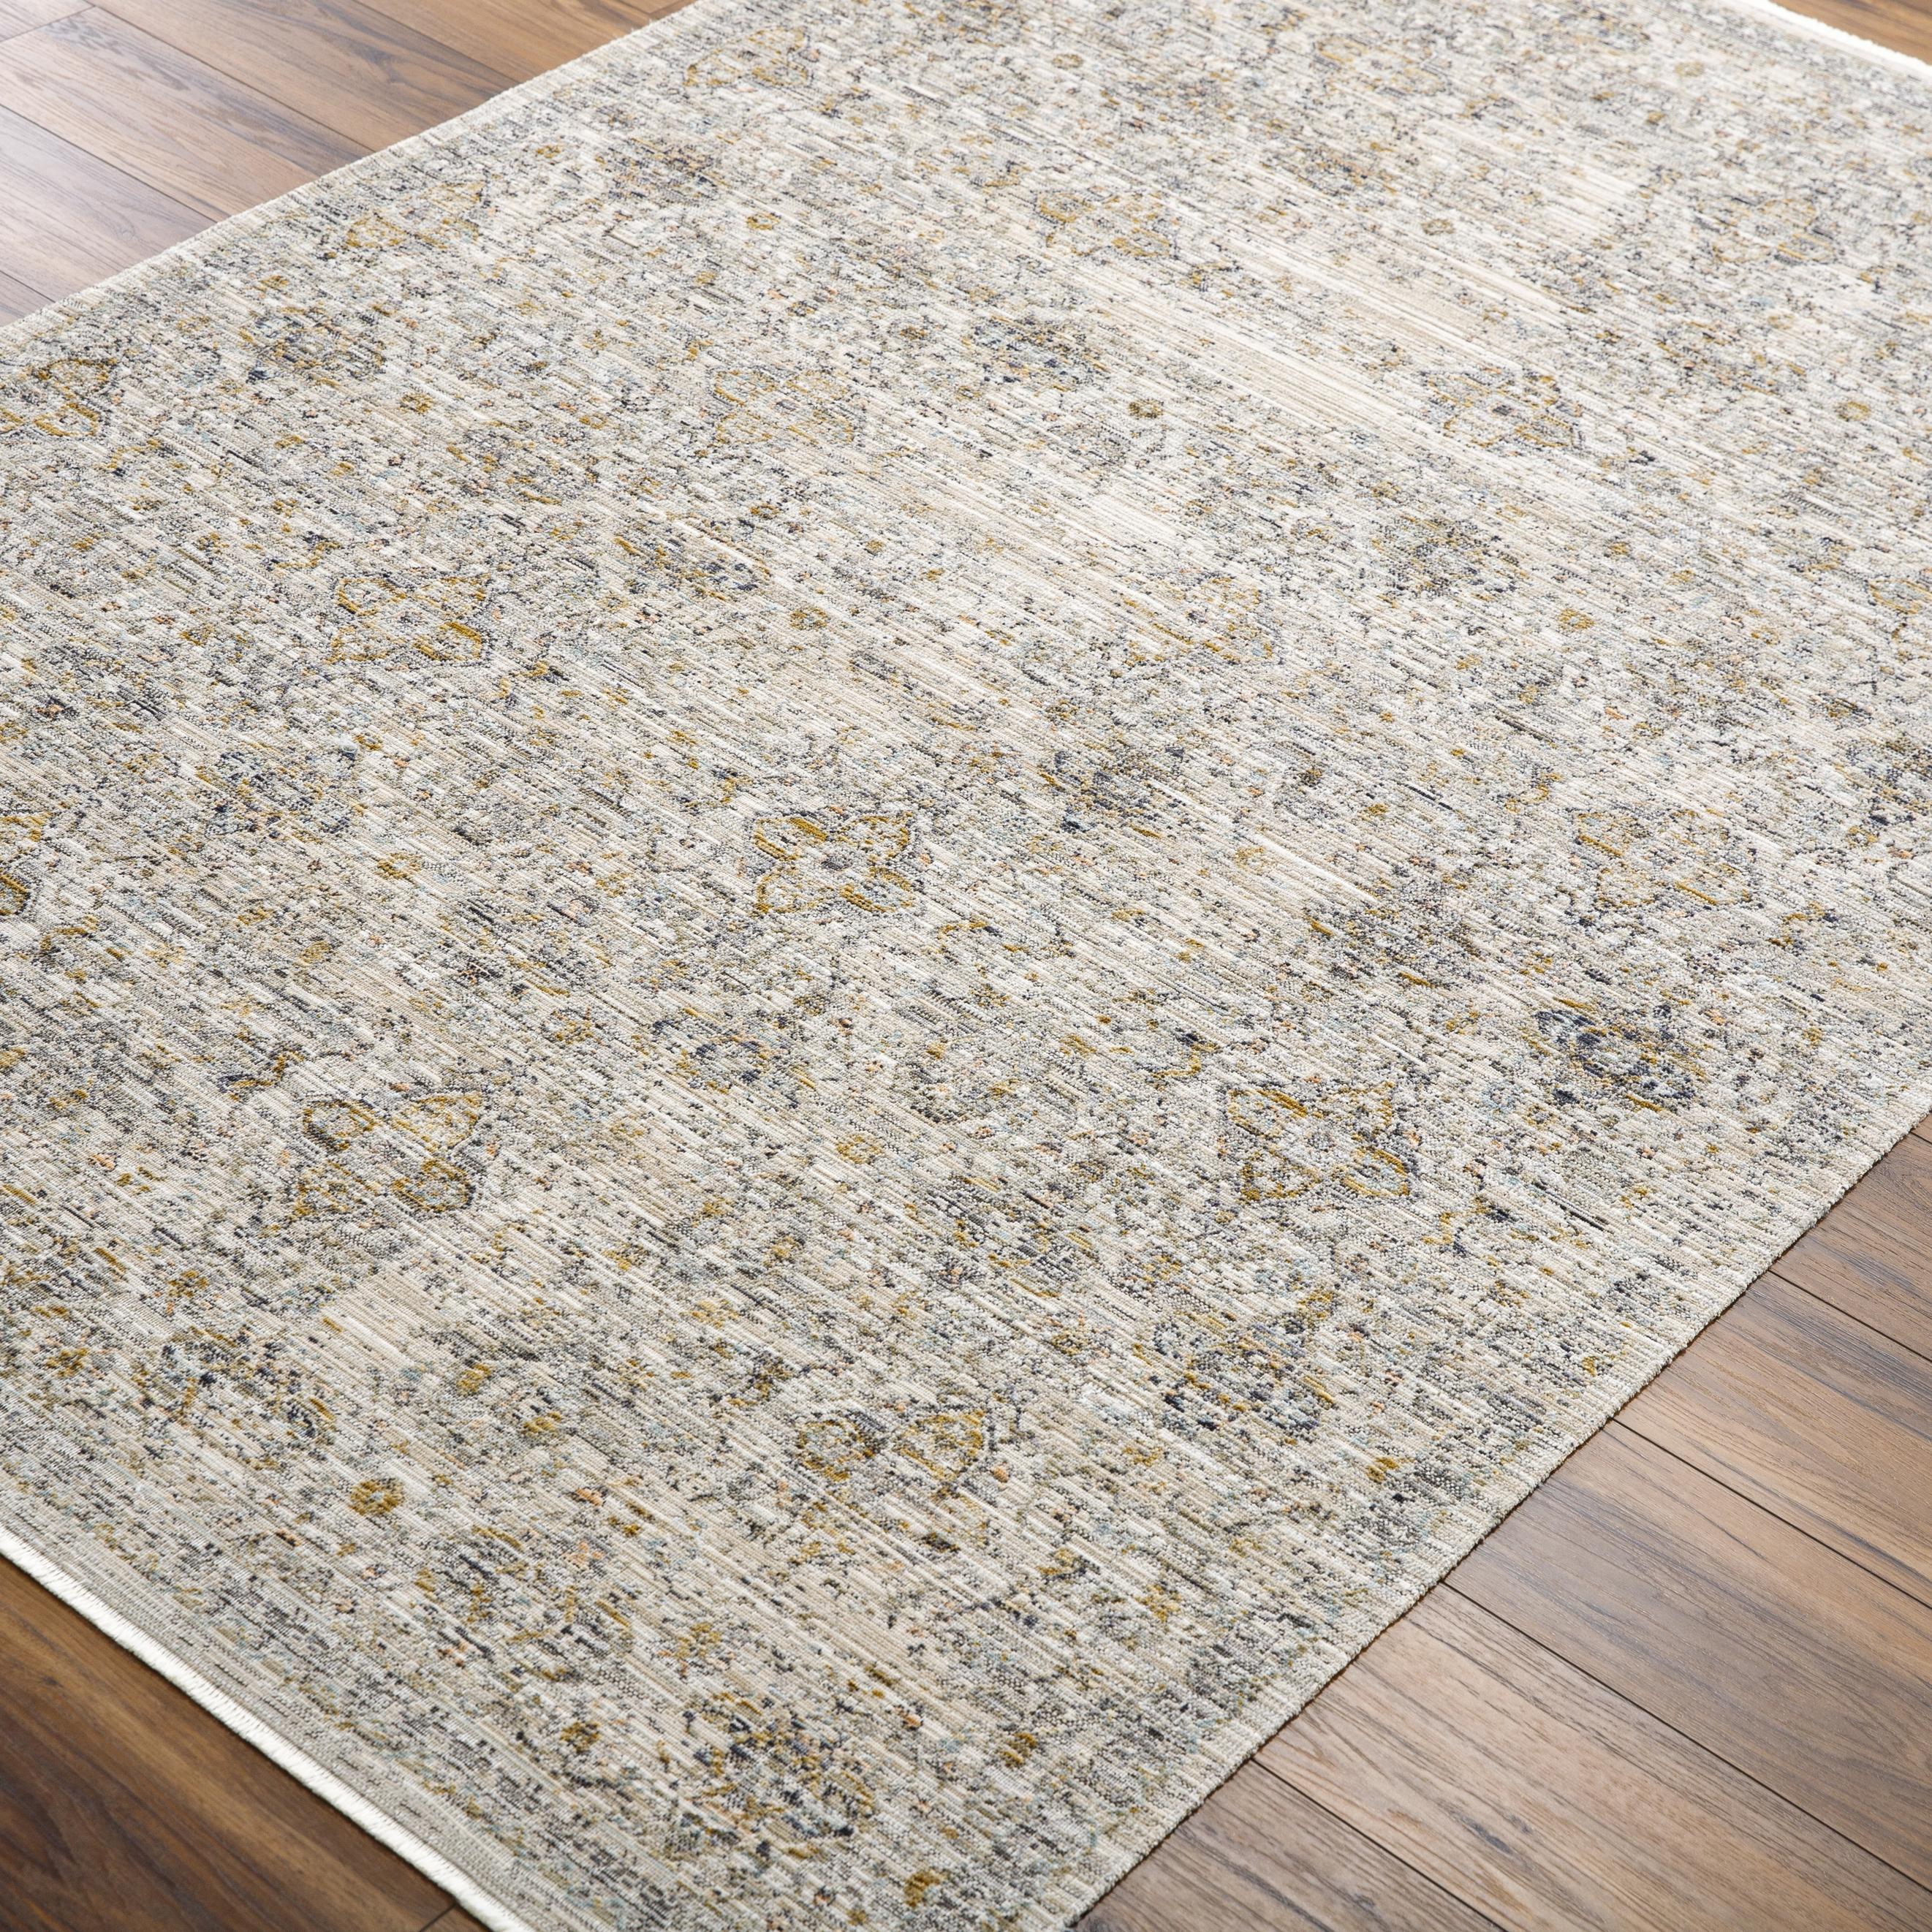 Introduce your home to the timeless beauty of the Margaret area rug! This special piece from our Becki Owens x Surya collaboration is the perfect way to add a vintage-inspired touch to any space. Amethyst Home provides interior design, new home construction design consulting, vintage area rugs, and lighting in the Miami metro area.